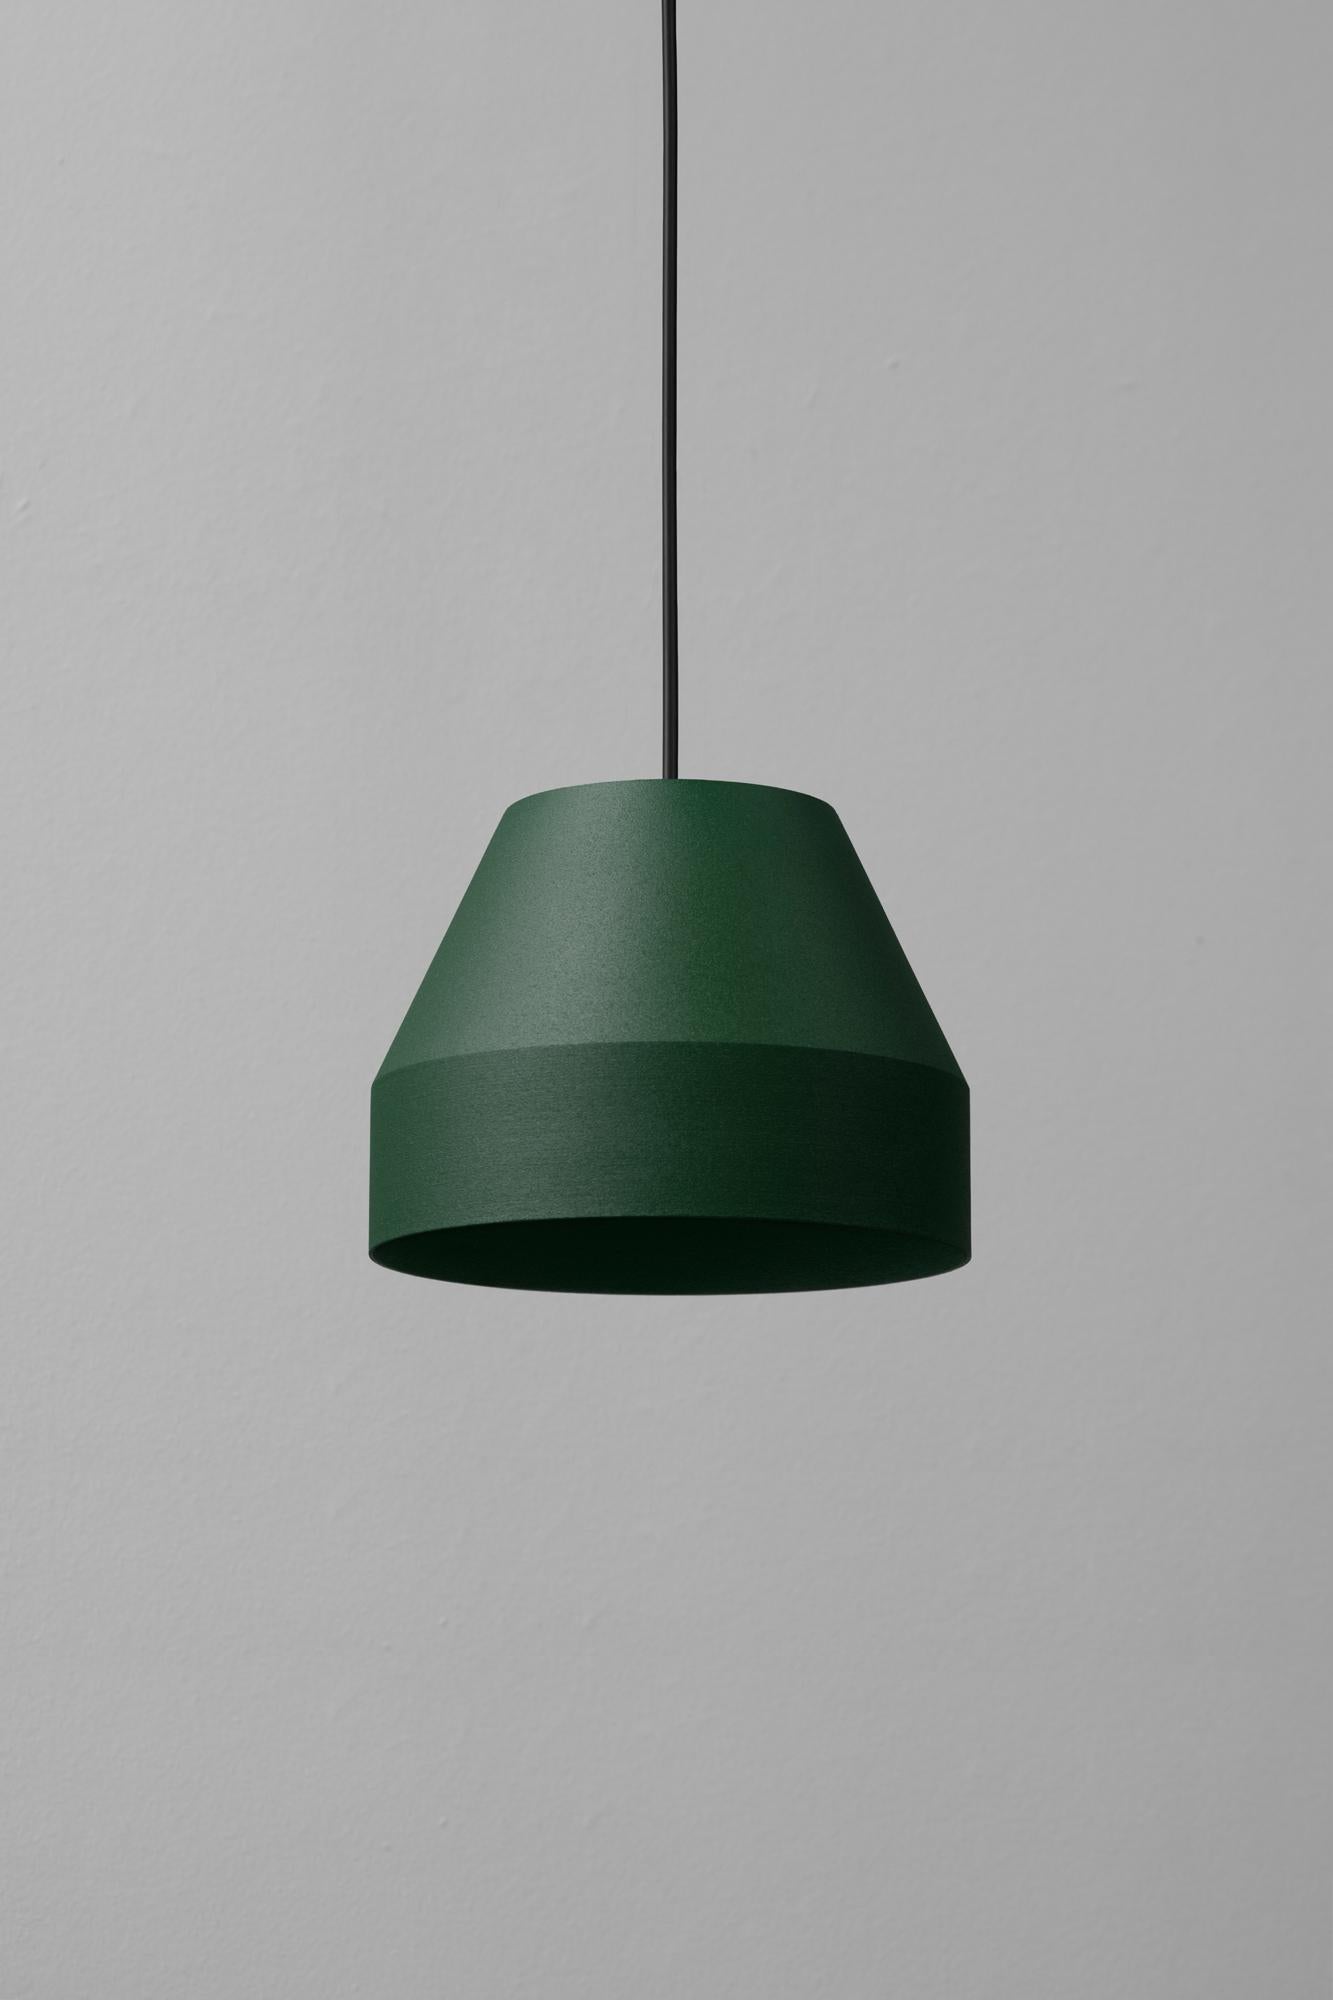 Small Forest Cap Pendant Lamp by +kouple
Dimensions: Ø 16 x H 12 cm. 
Materials: Powder-coated steel.

Available in different color options. The rod length is 200 cm. Please contact us.

All our lamps can be wired according to each country. If sold